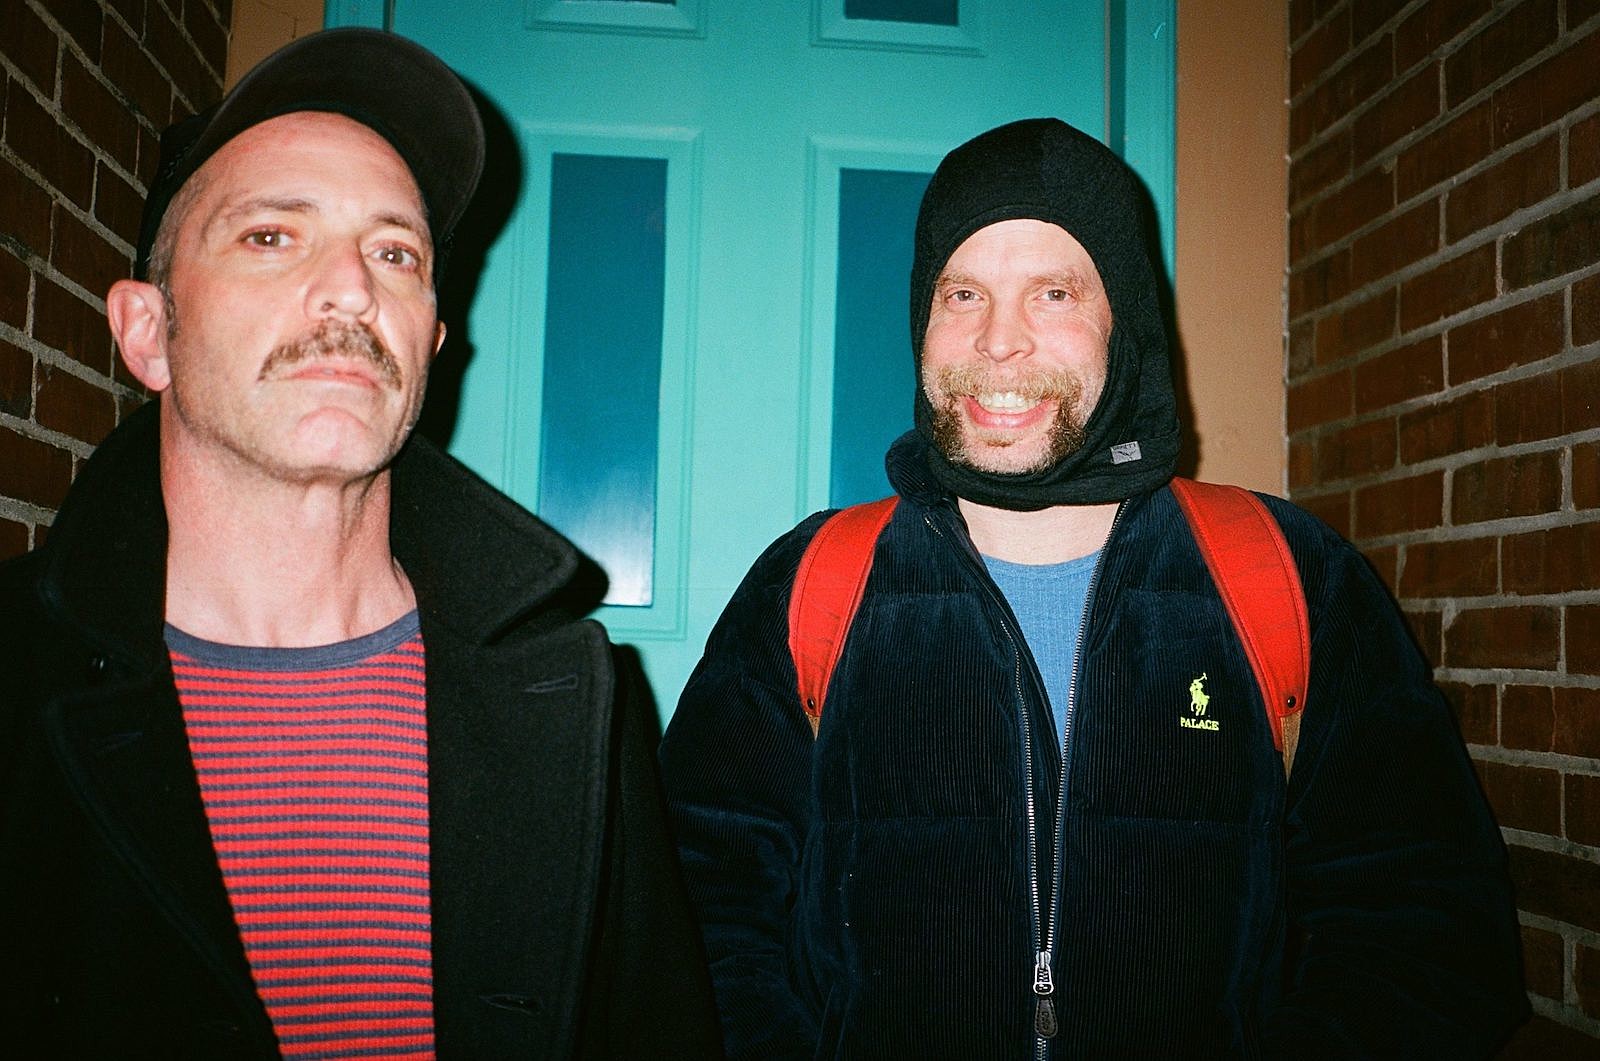 Matt Sweeney & Bonnie 'Prince' Billy tell us about the inspirations behind  'Superwolves'